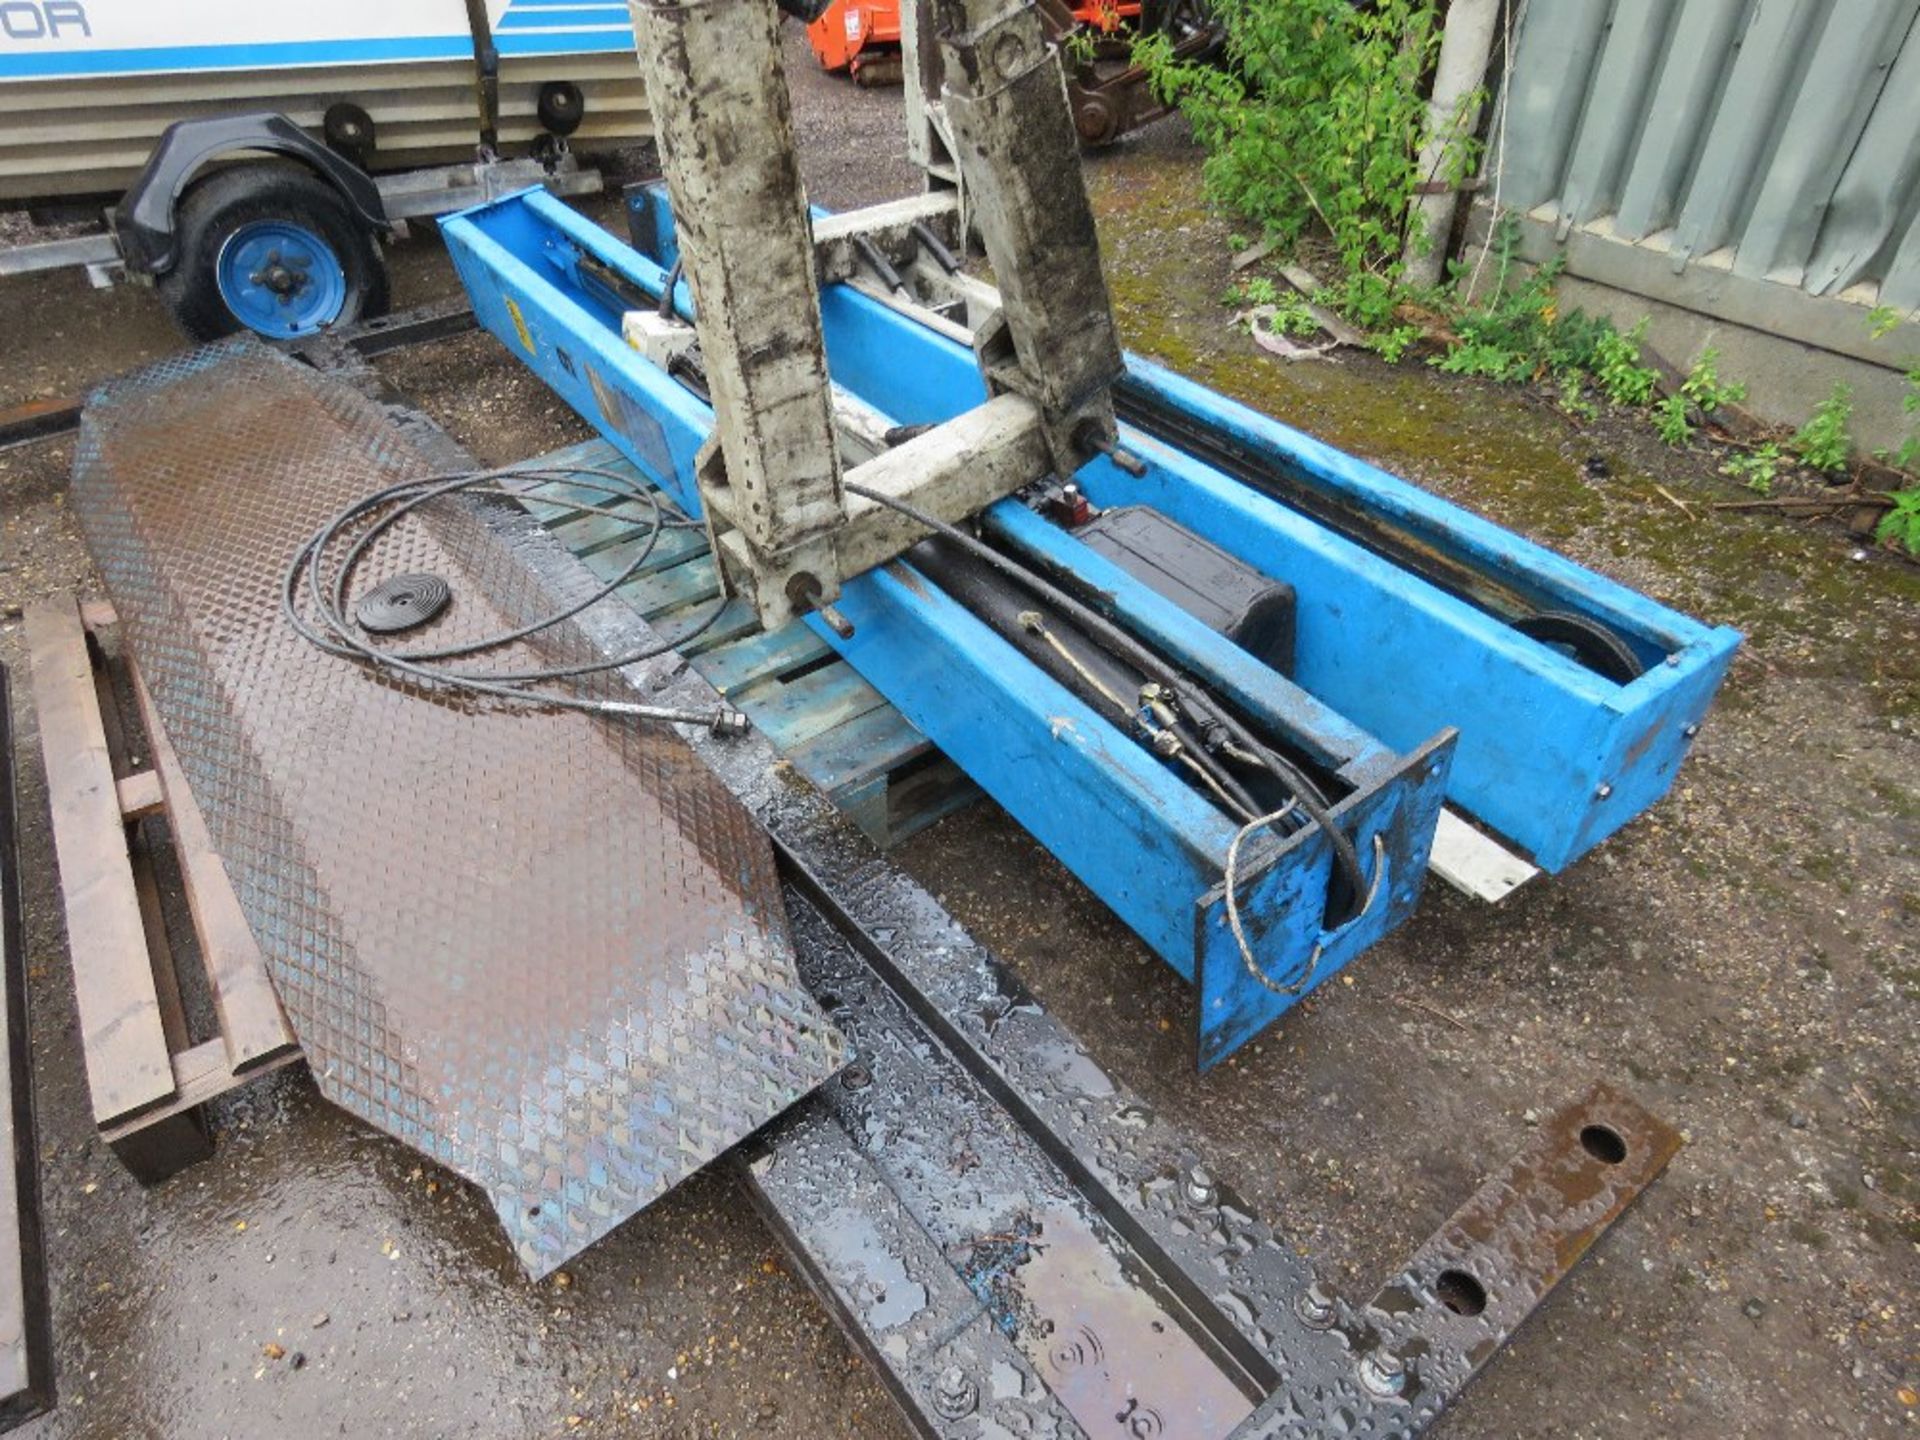 HOFFMAN 3200KG RATED 2 POST VEHICLE LIFT. WORKING WHEN RECENTLY REMOVED FROM WORKSHOP LIQUIDATION.